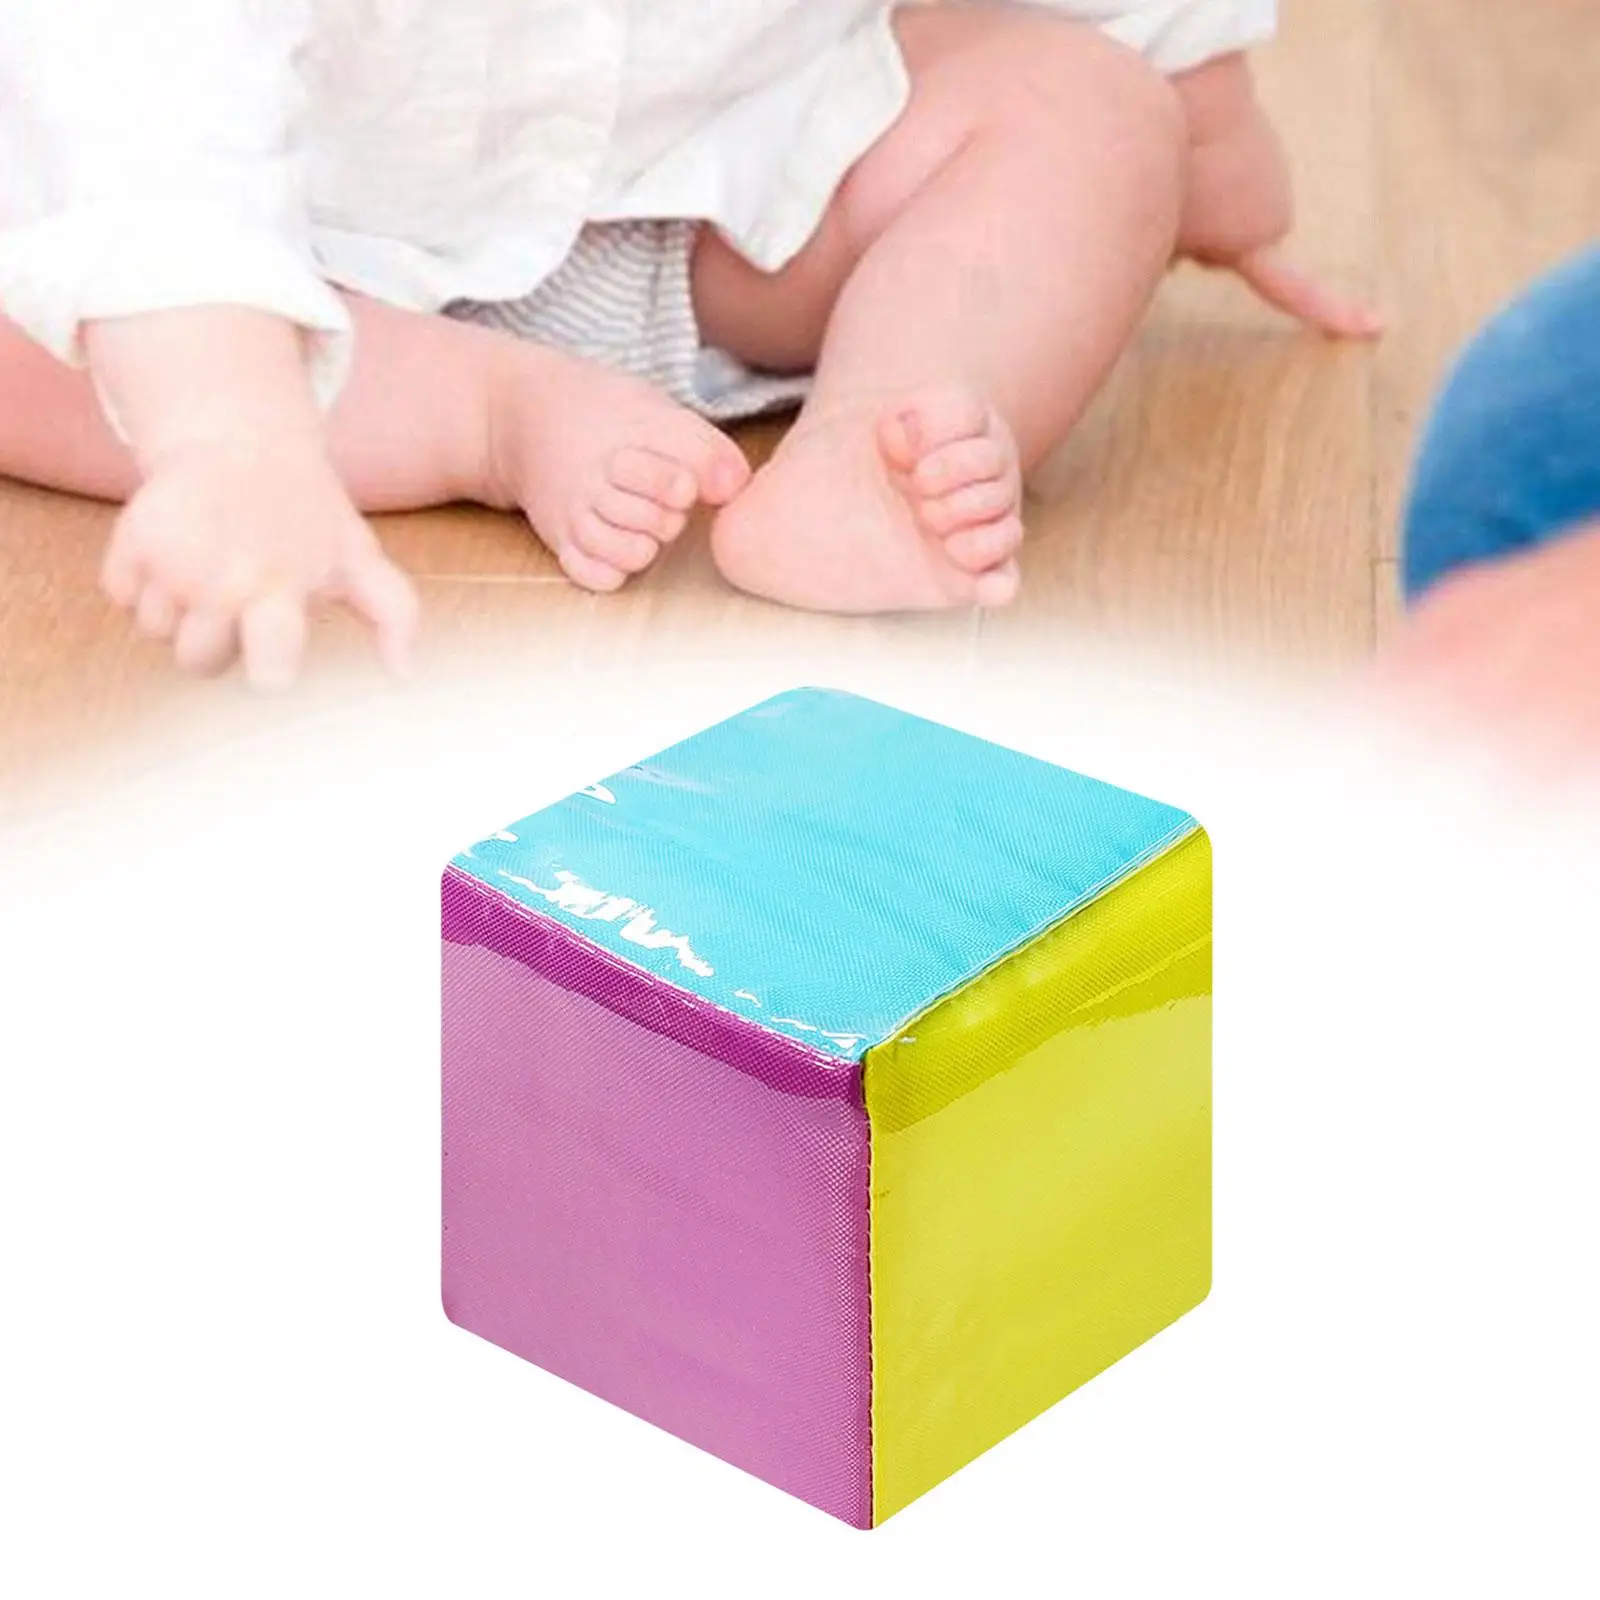 3.9 inch Large Dice Plush Cube with Pocket Education Playing Game Dice for Preschool Teaching Blocks Toys Classroom